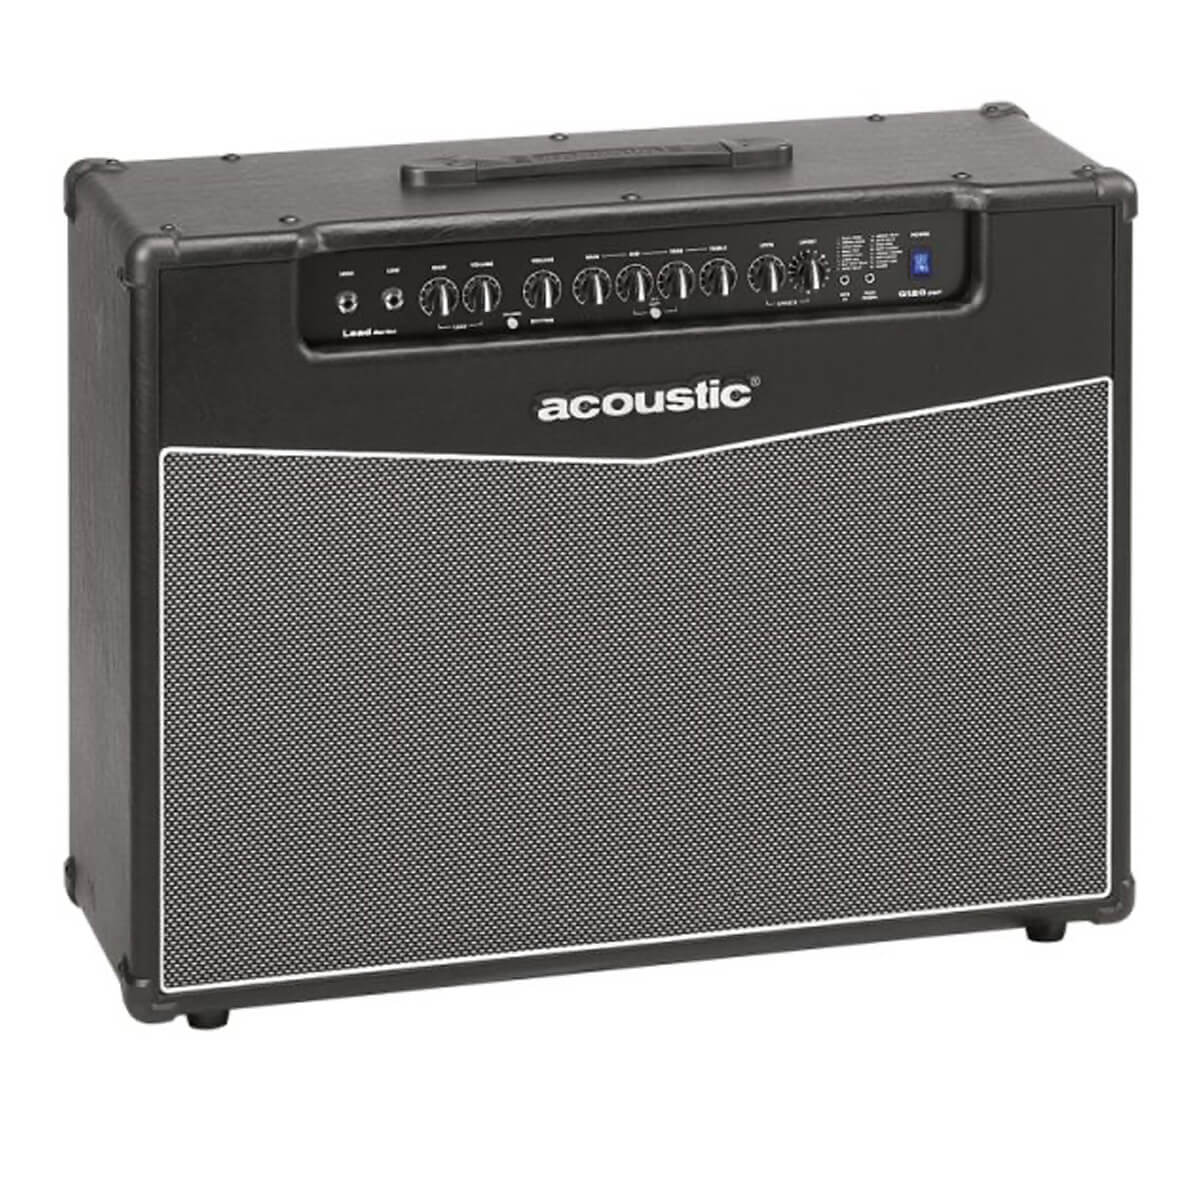 Right angle view of Acoustic G120 DSP 120 W Guitar Amp Combo w/16 DSP Effects